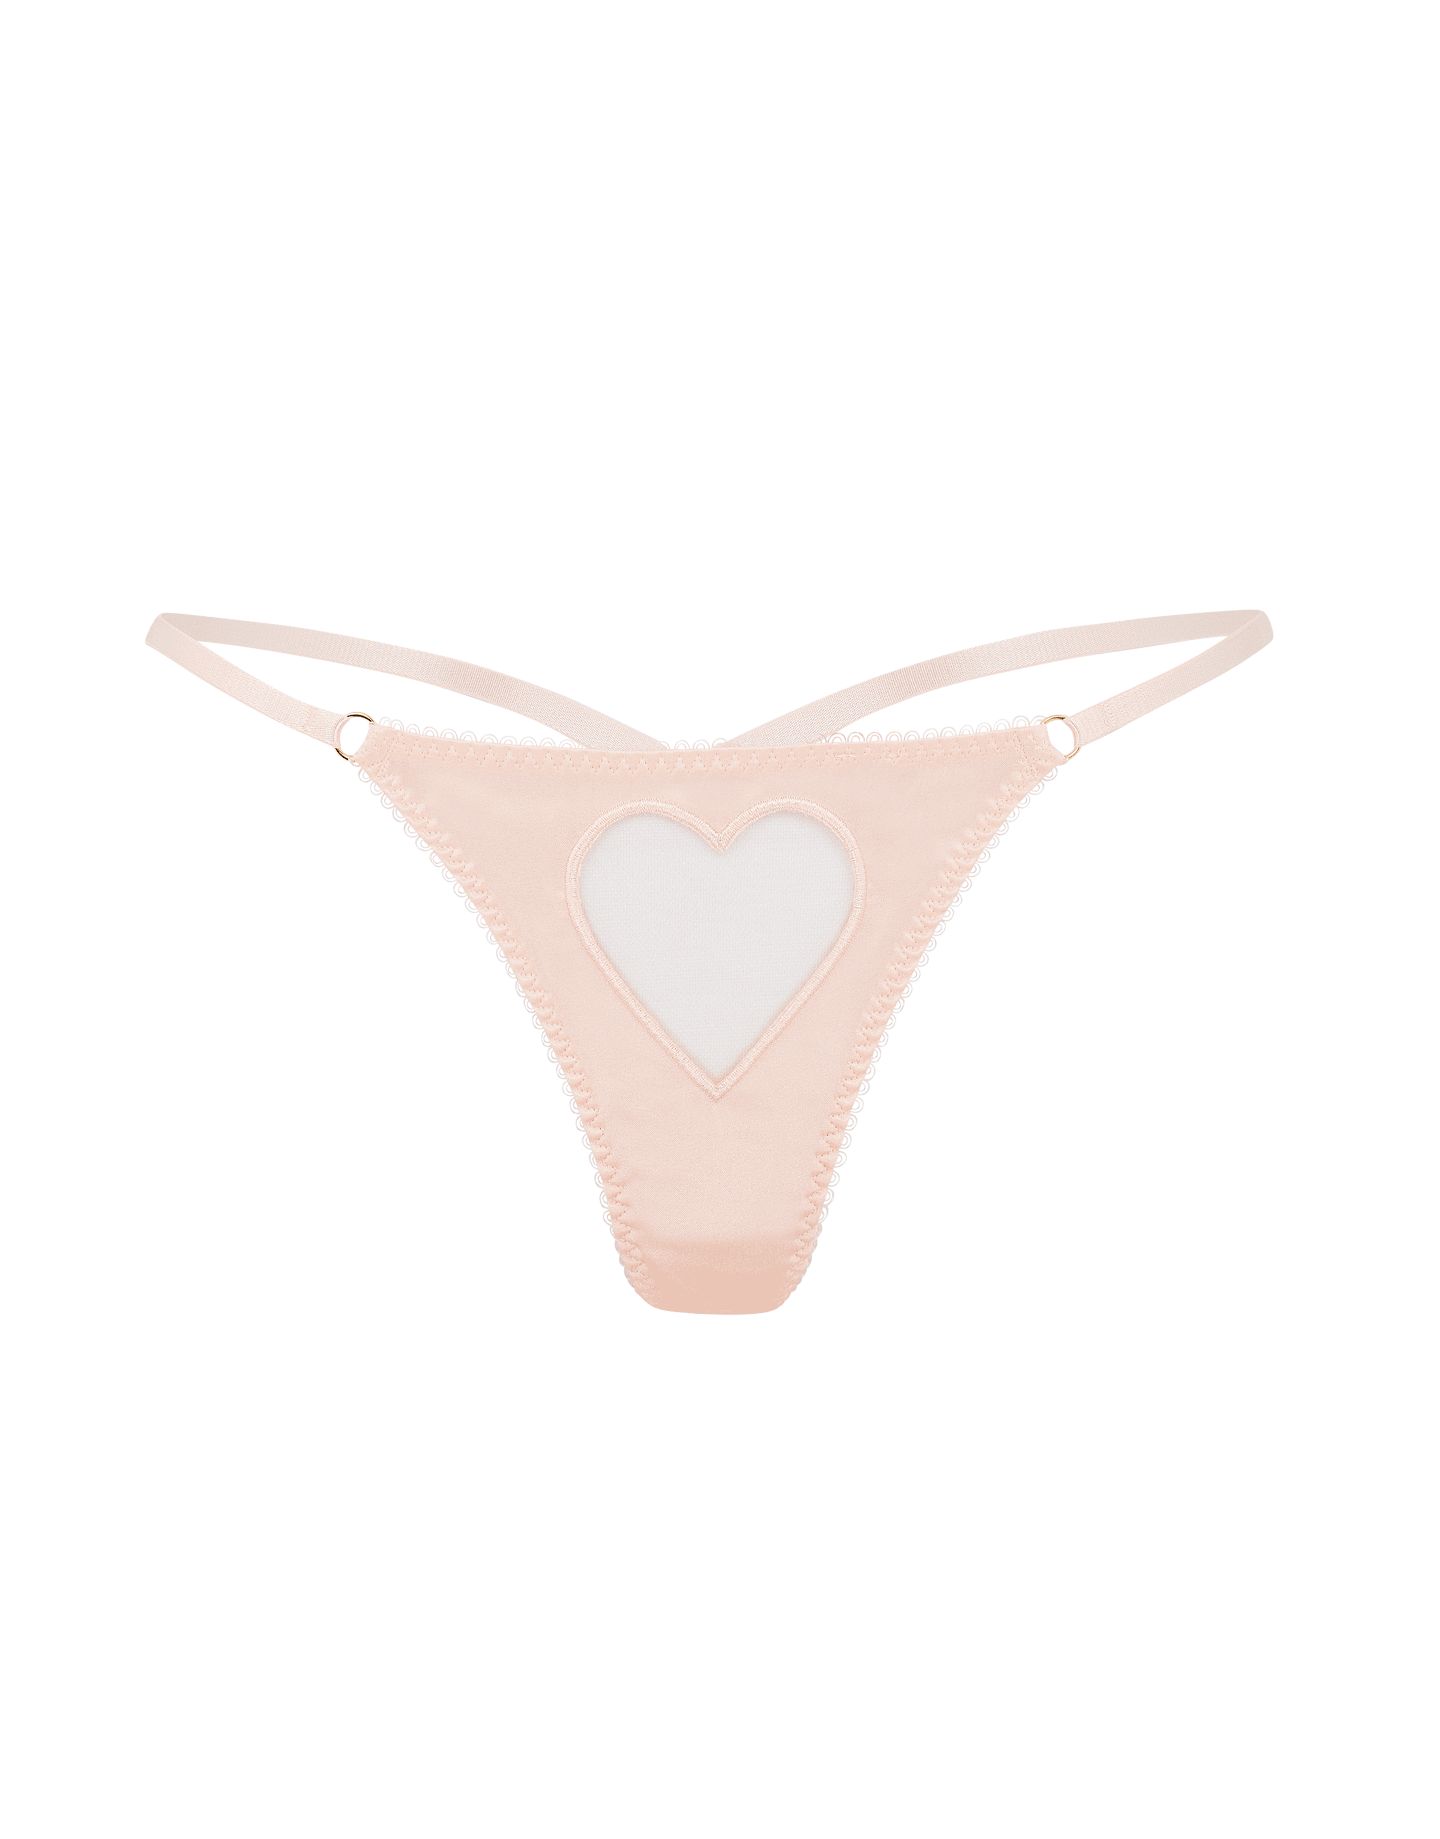 Ettie Thong in Pink | Agent Provocateur All Lingerie | Agent Provocateur (UK)